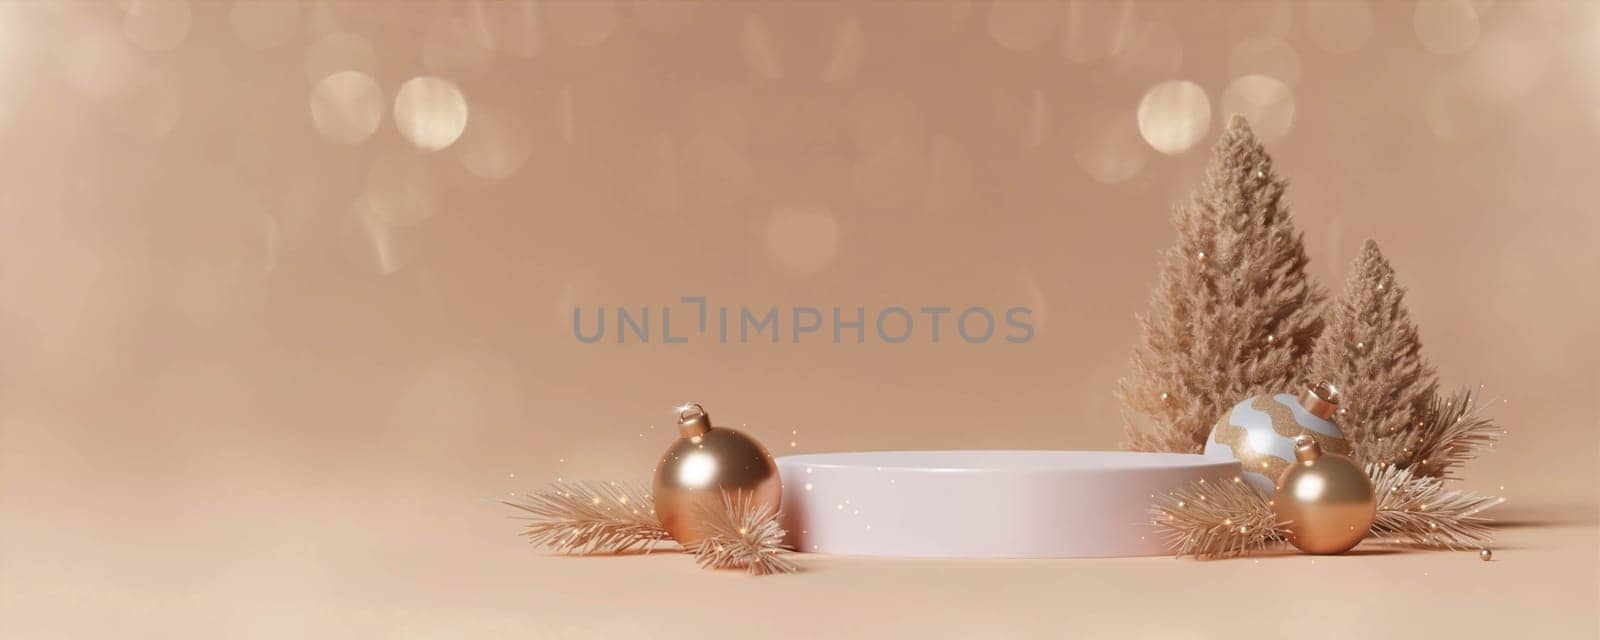 3d Christmas podium. Realistic 3d design stage podium. Decorative festive elements glass bauble balls. Xmas holiday template podium. by meepiangraphic